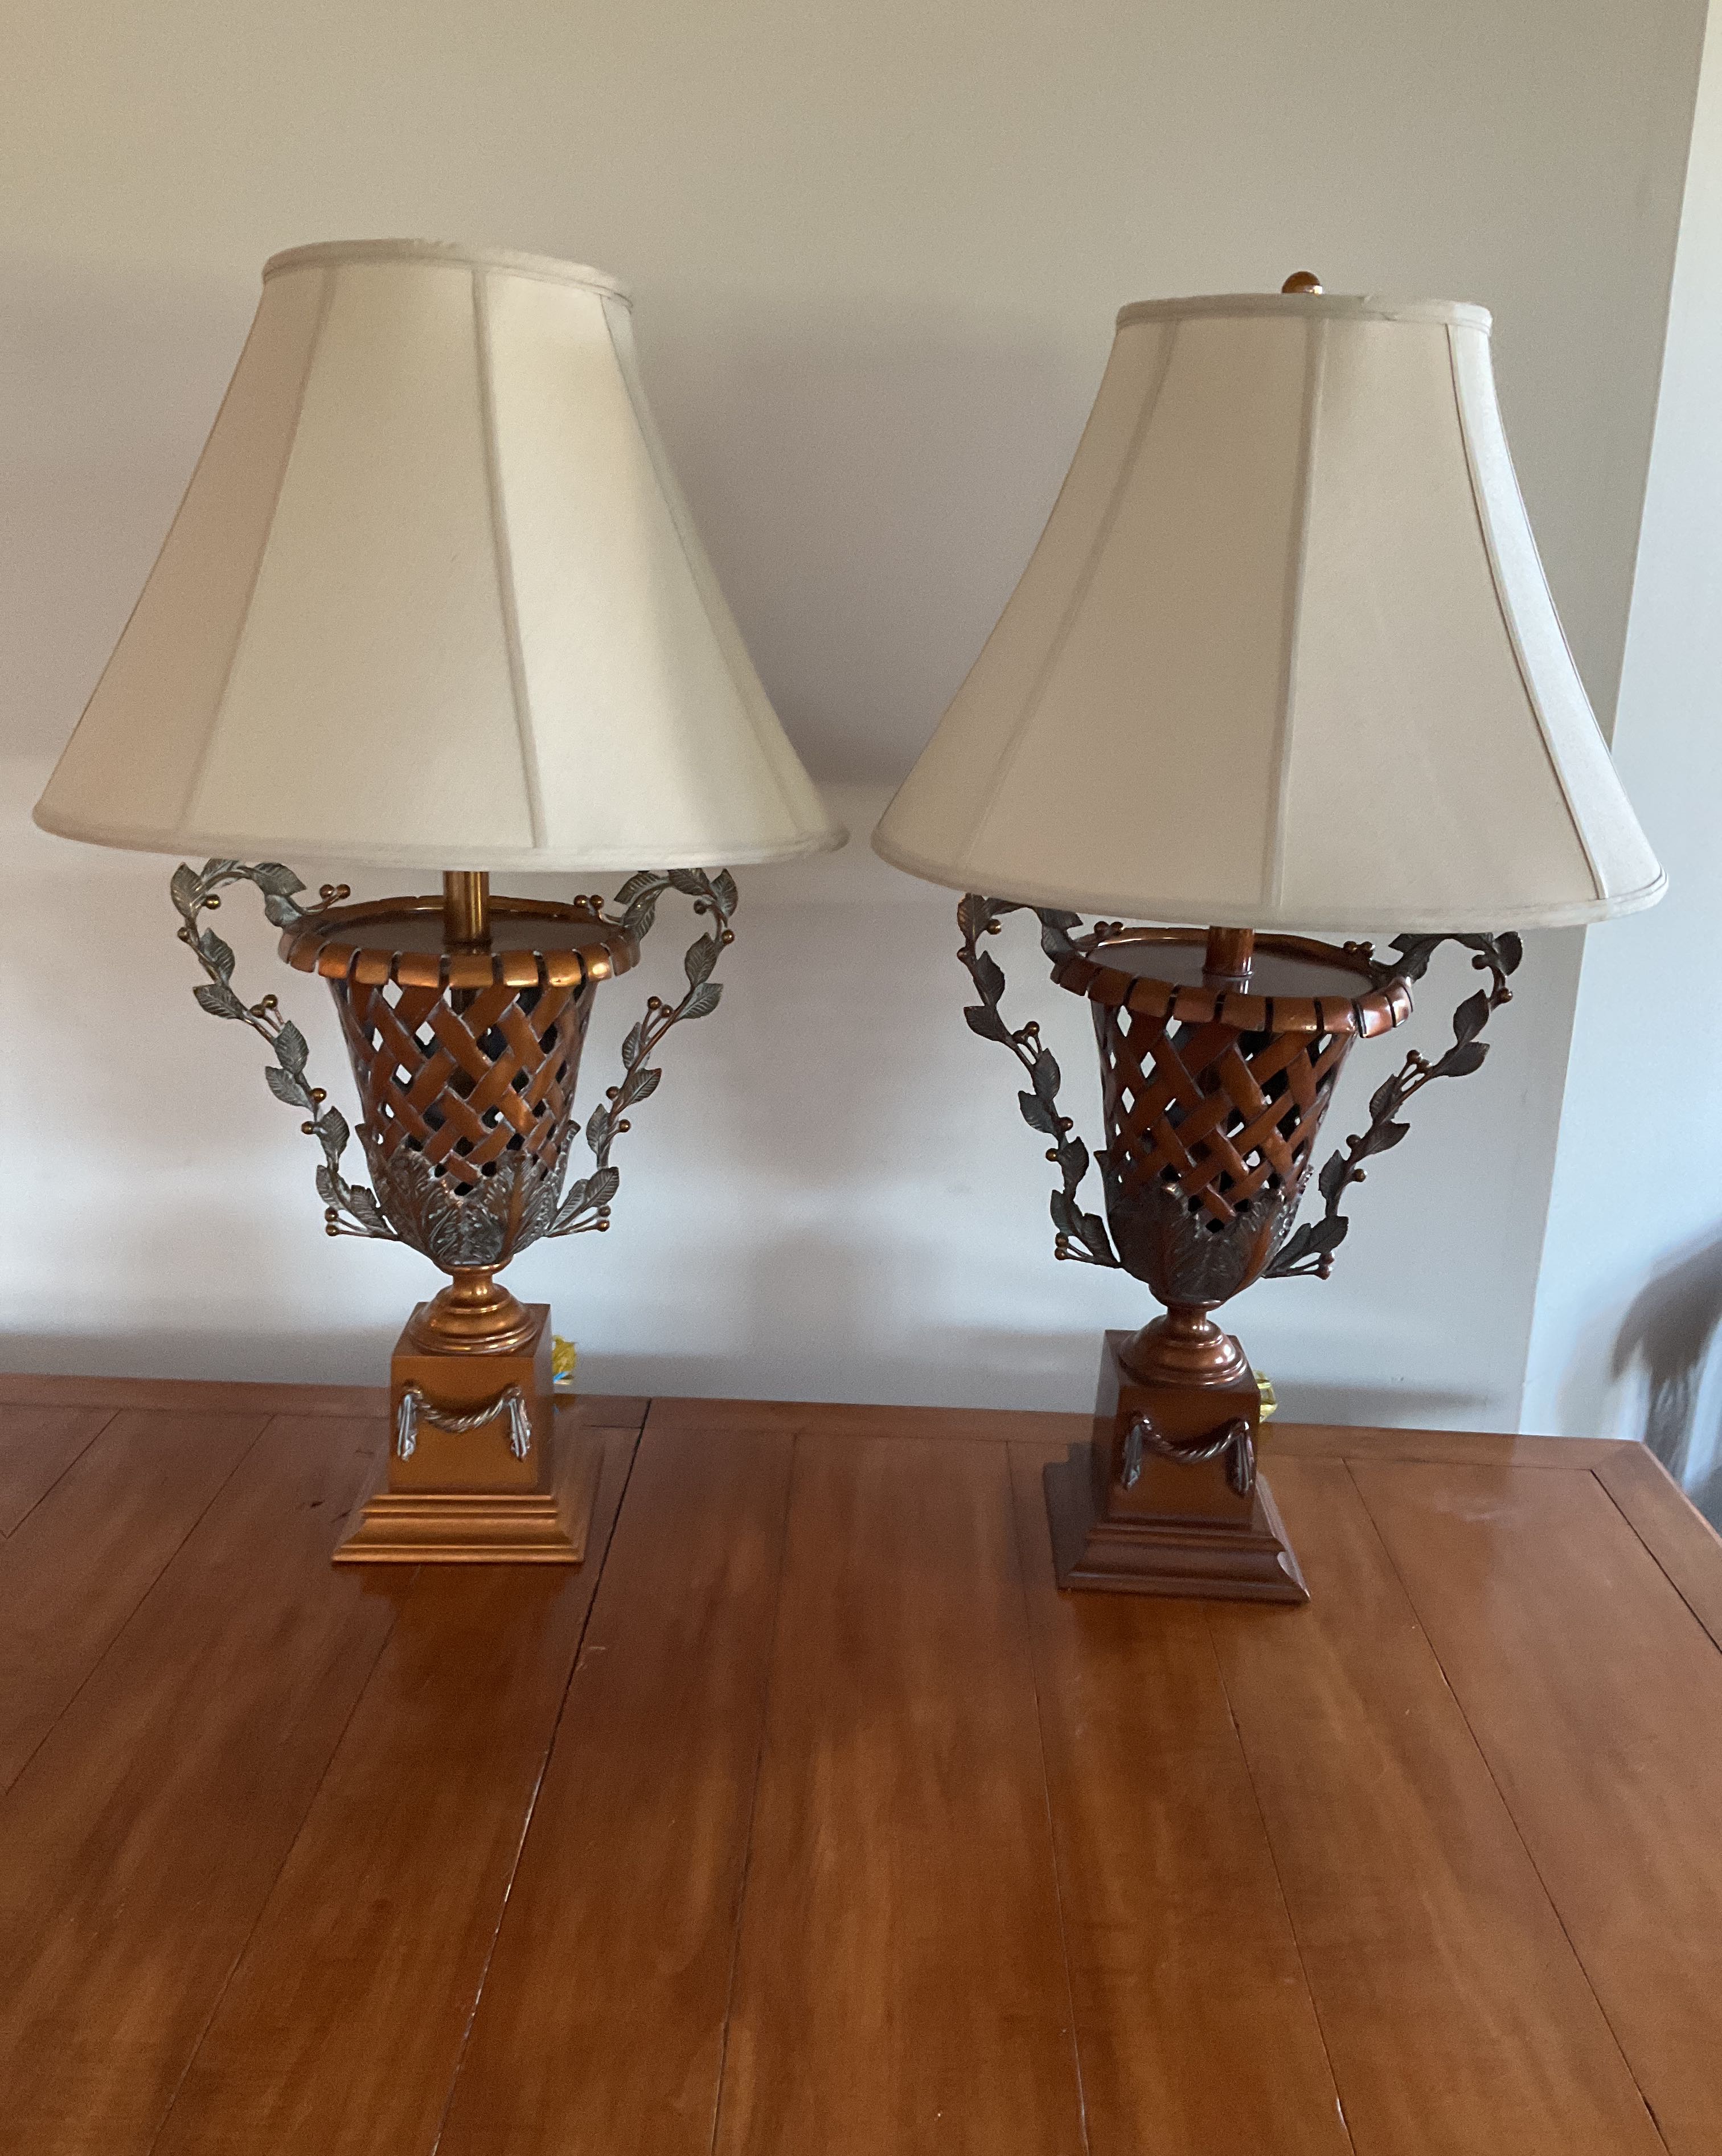 Pair of Frederick Cooper Trees With Monkeys Table Lamps